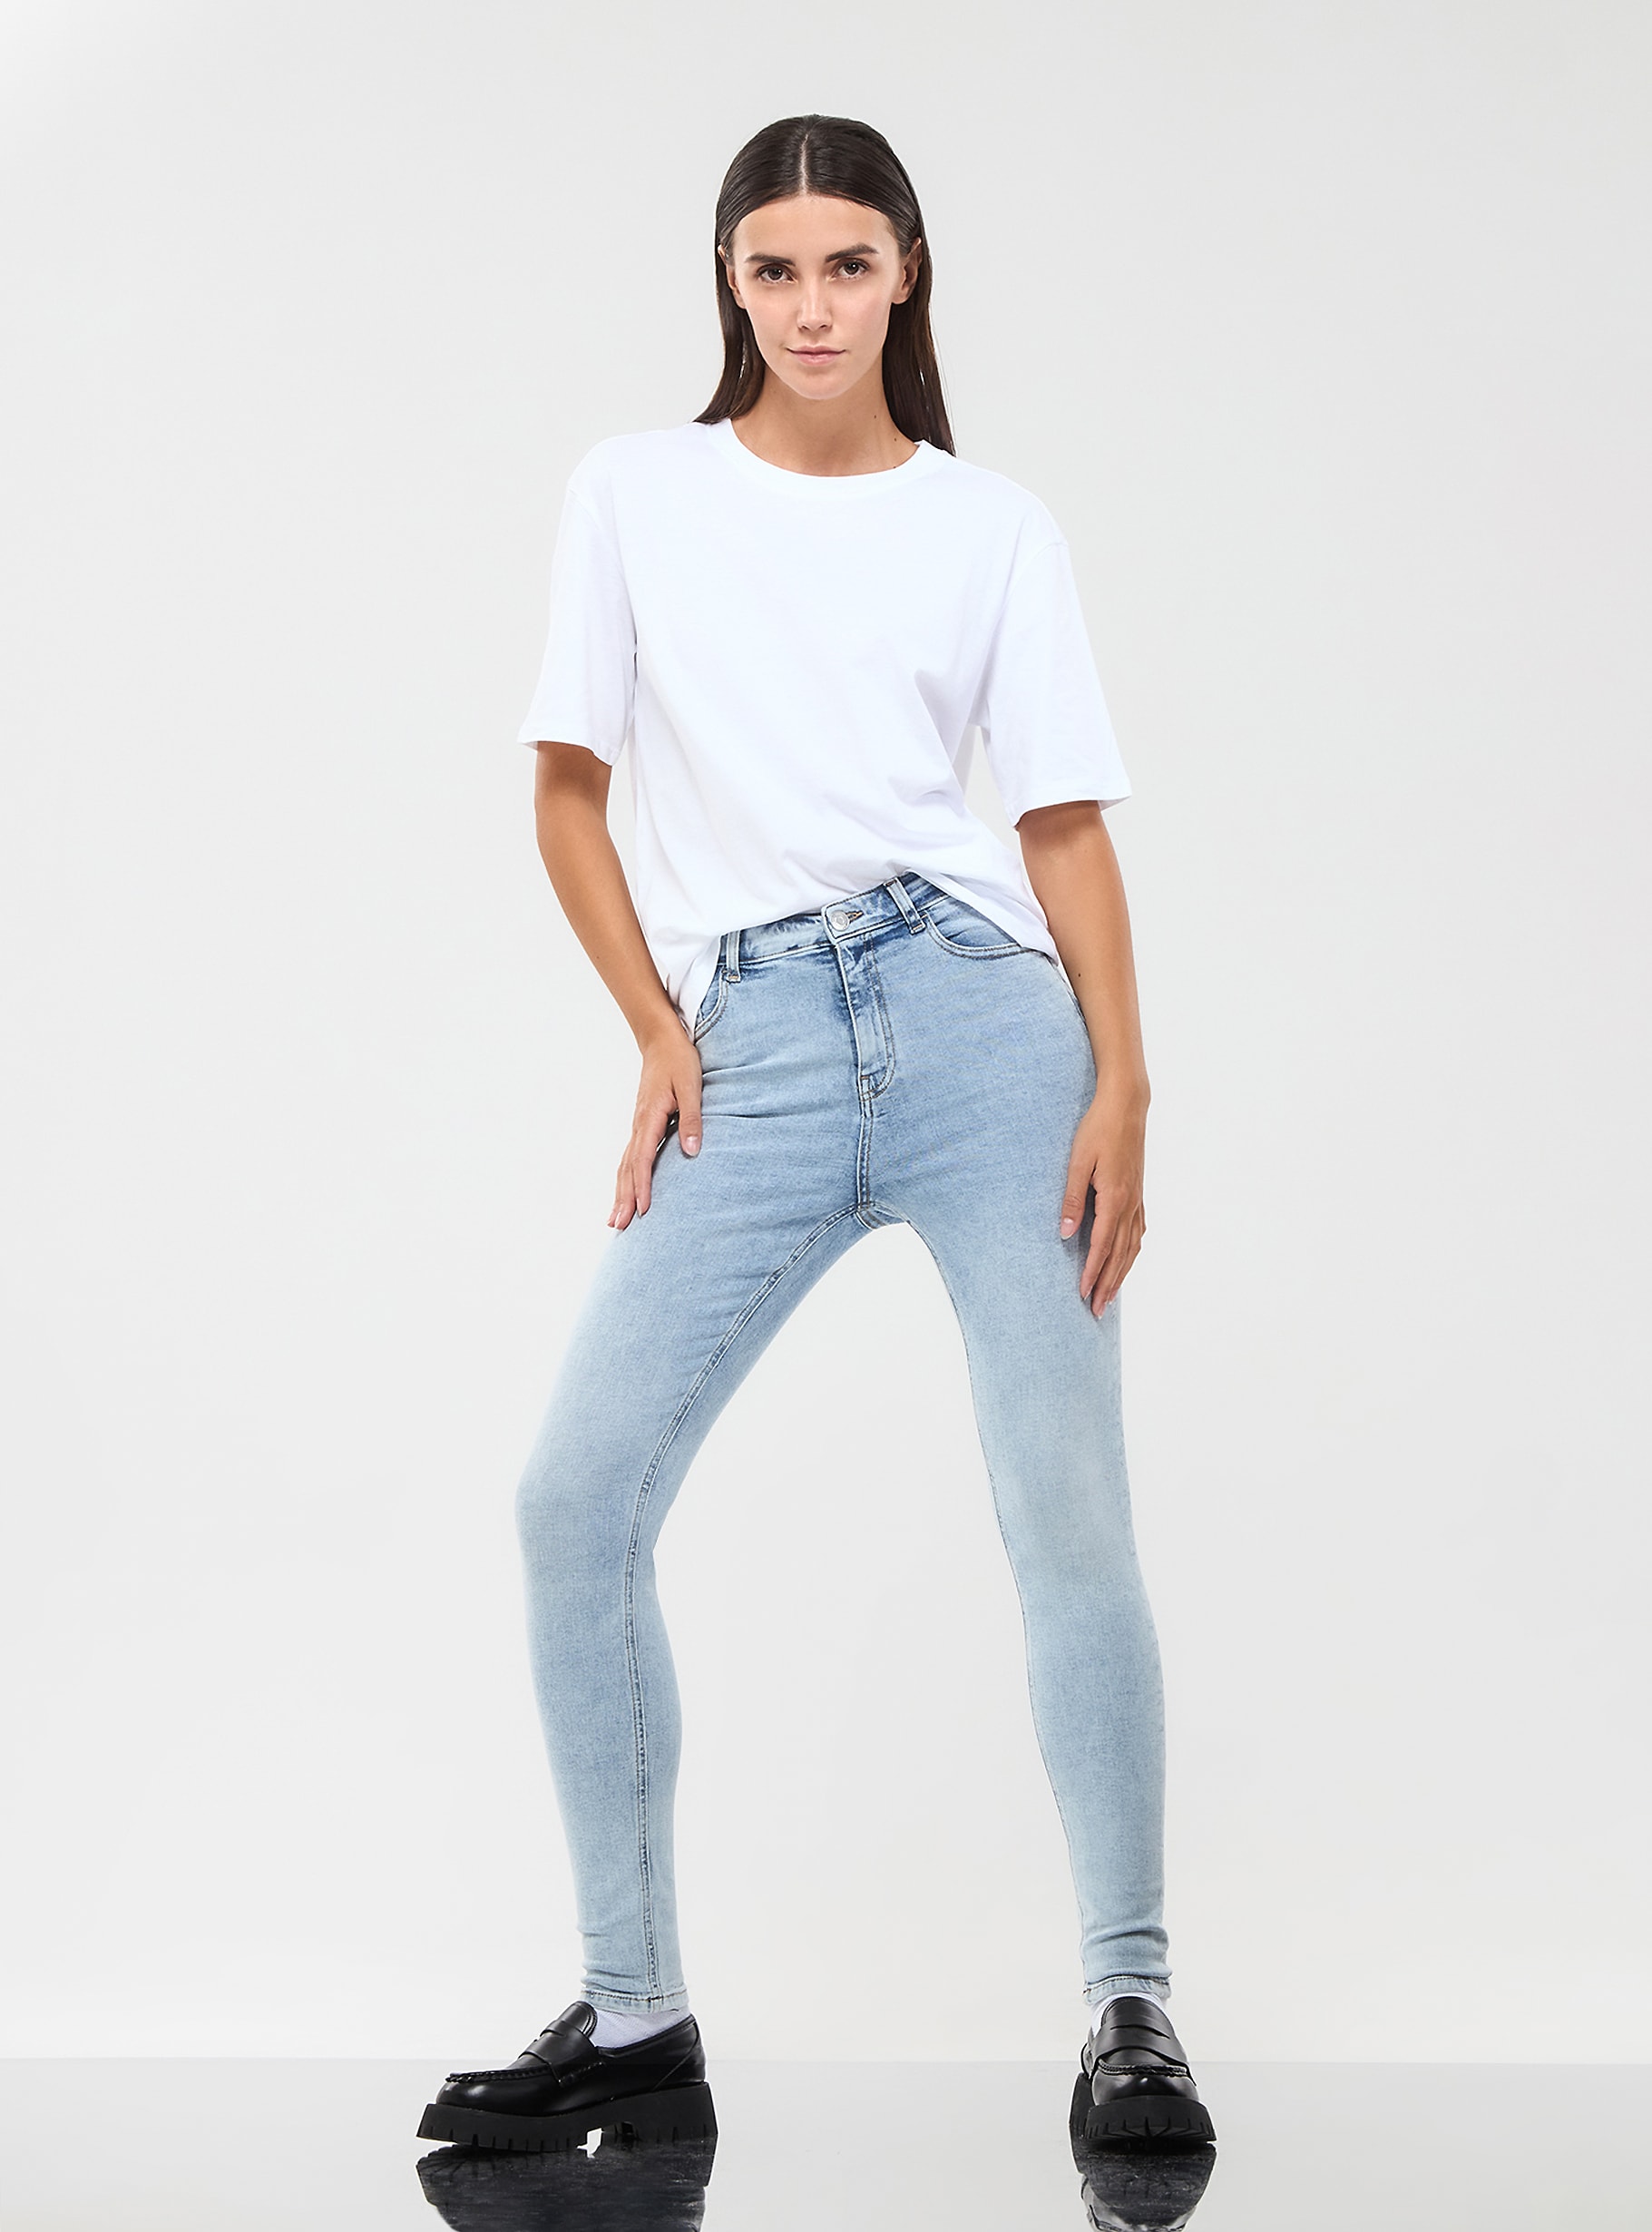 Buy Sky Blue Cotton Knitted Jeans Online in India -Beyoung